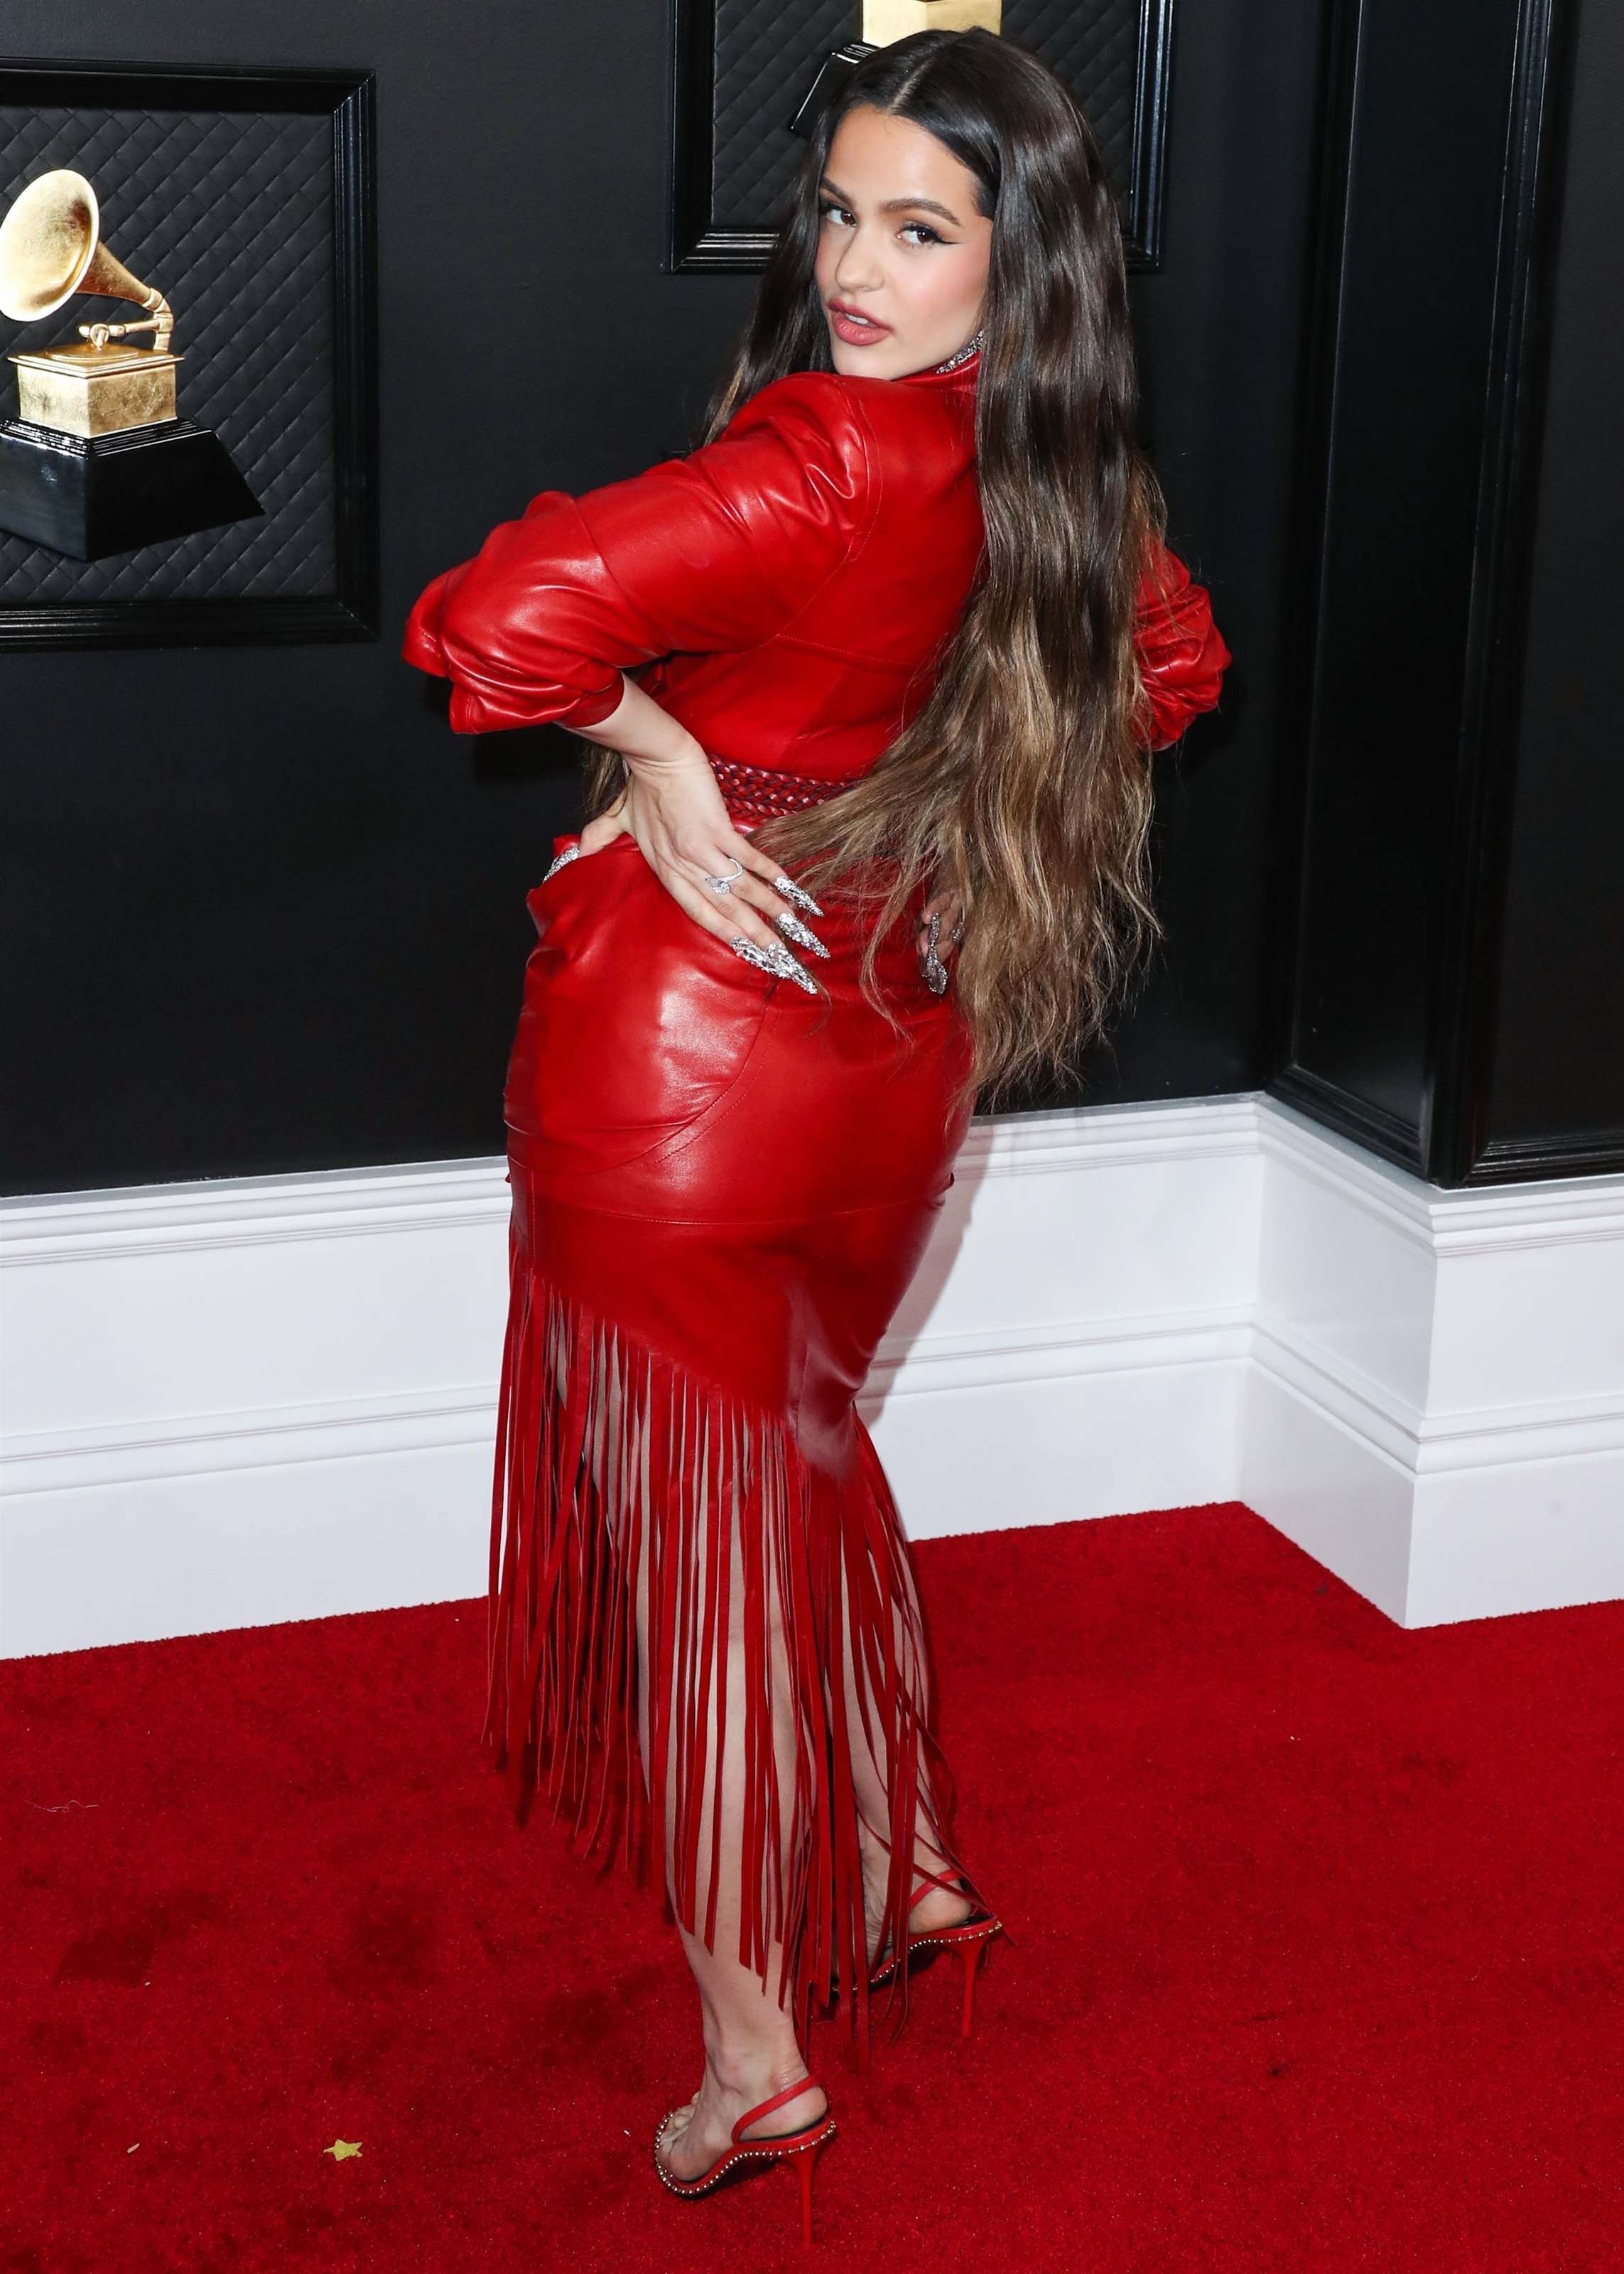 Rosalia attends 62nd Annual GRAMMY Awards at Staples Center in Los Angeles, CA